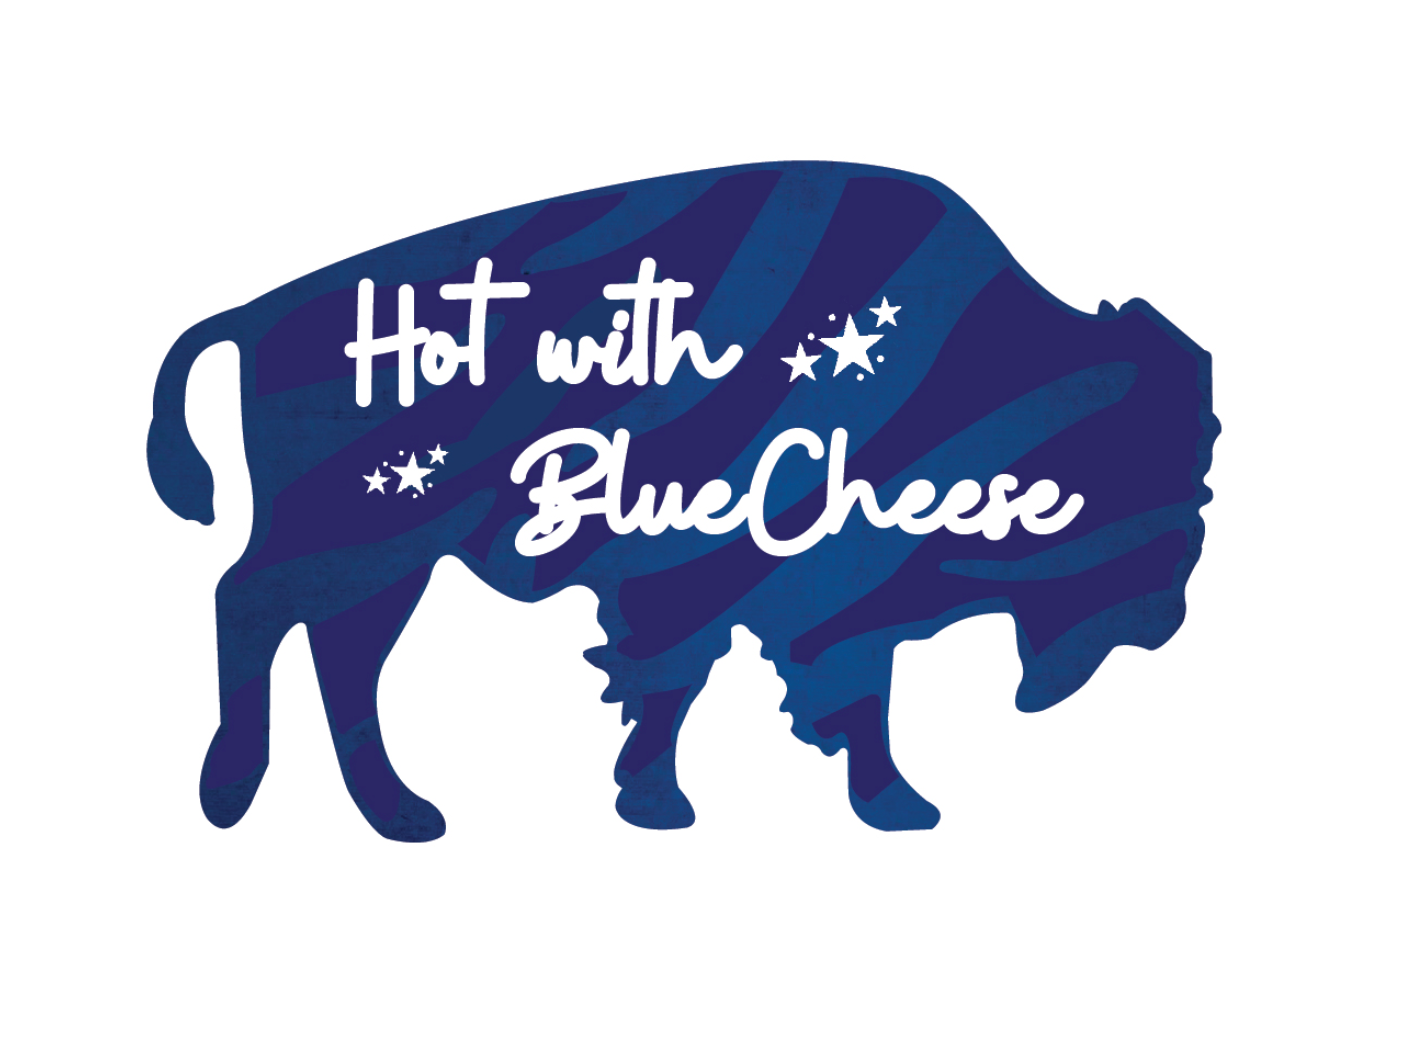 Products – Hot with Blue Cheese